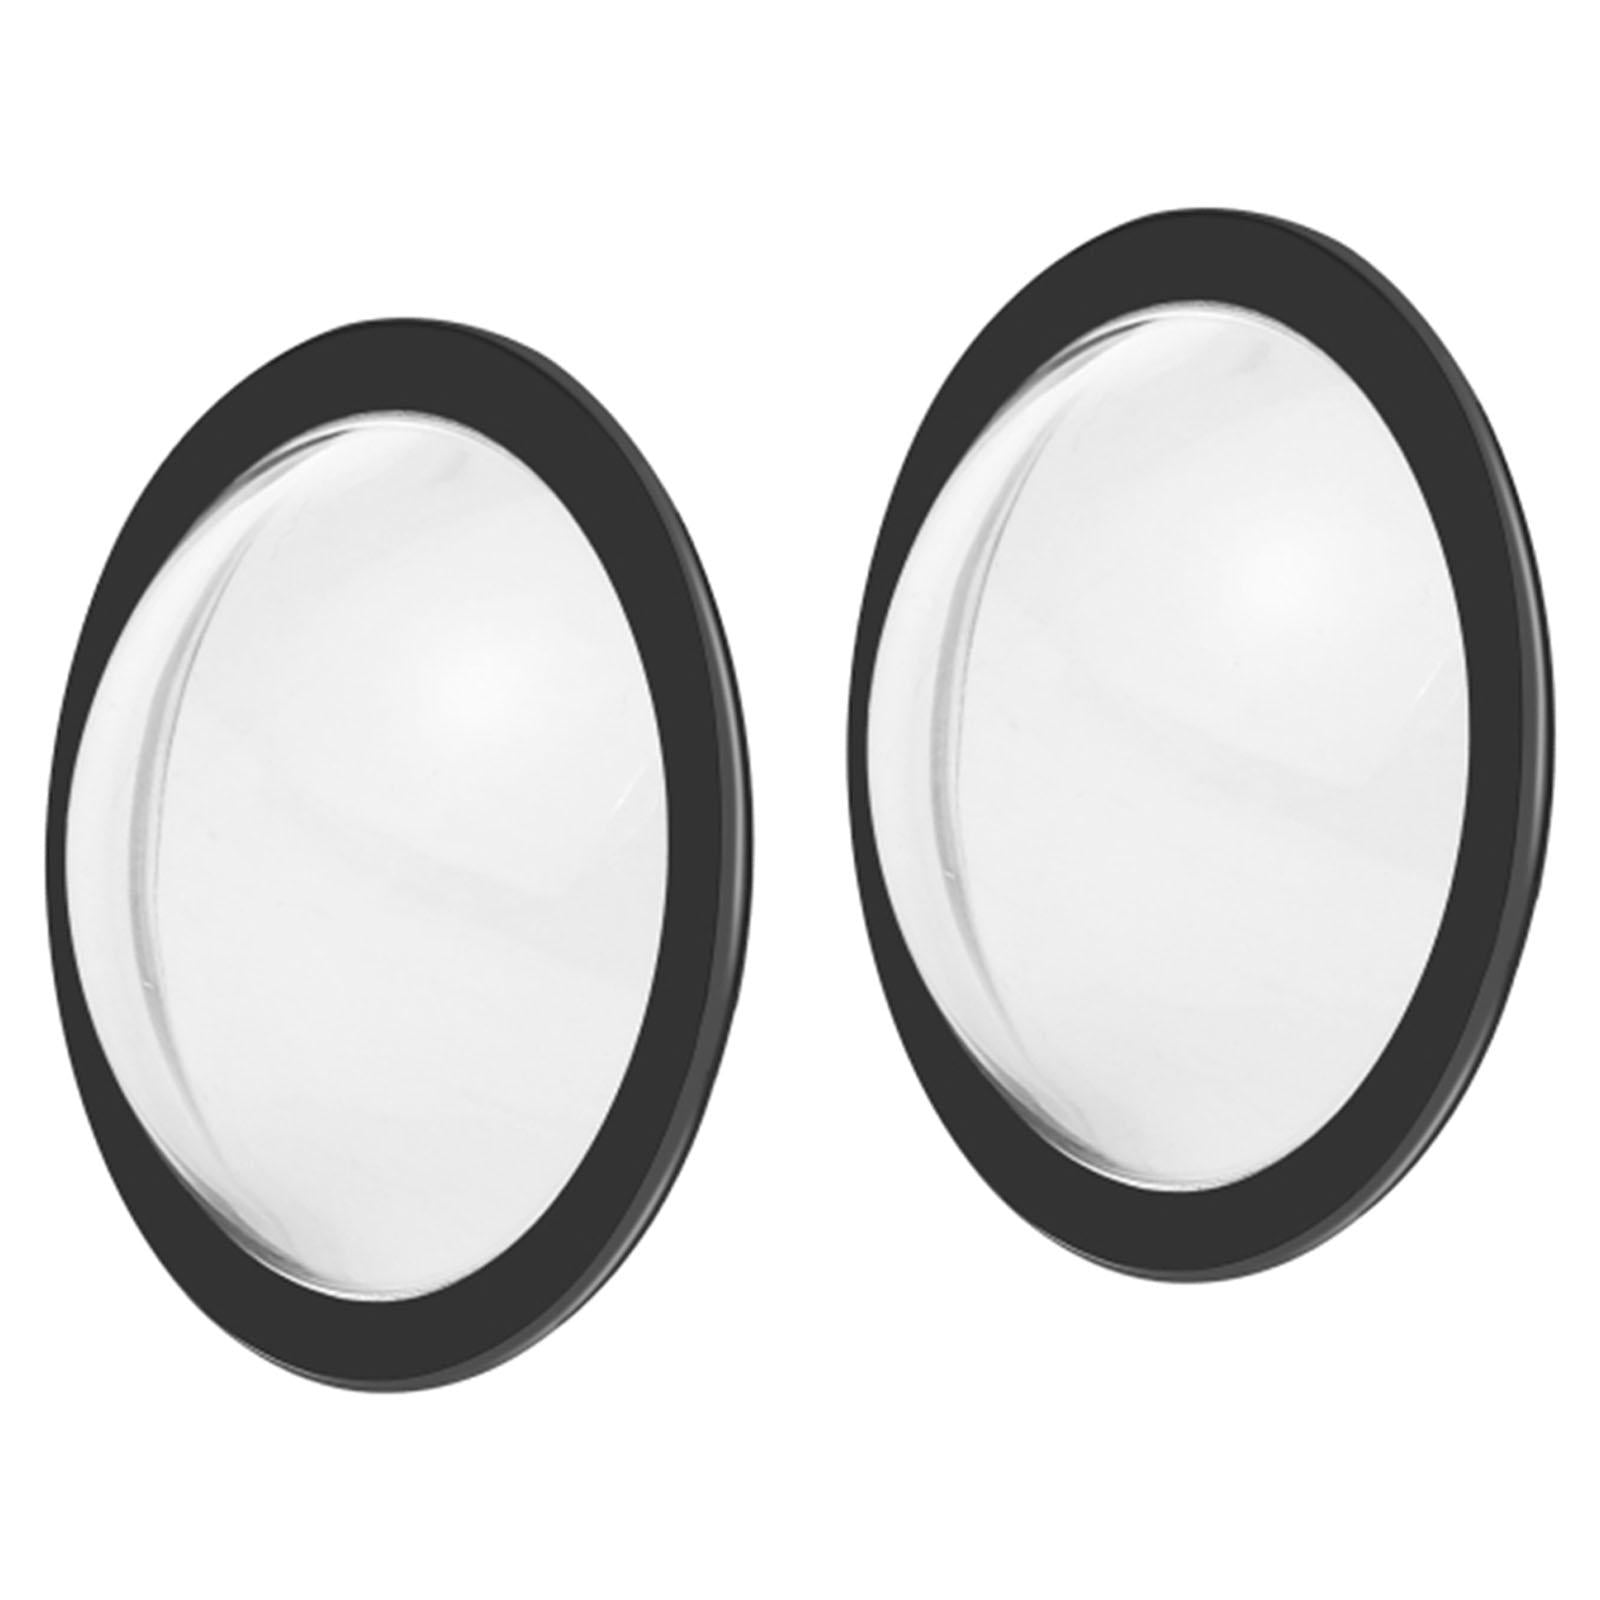 Lens Guards guard Protective/ Anti Scratch for SC2 S V